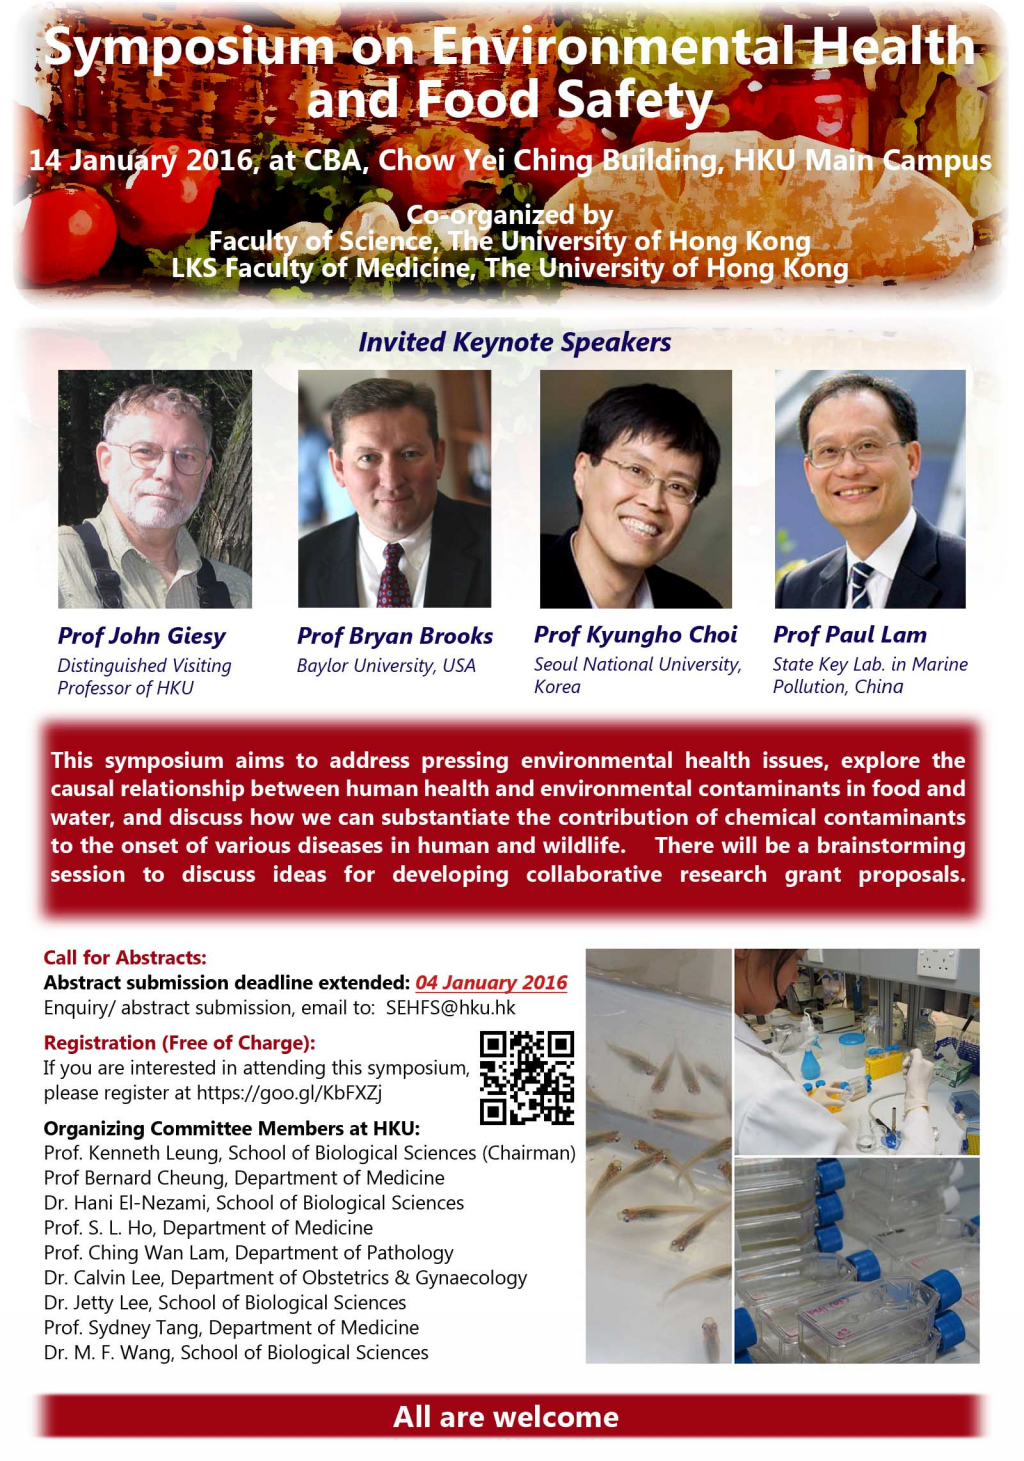 Symposium on Environmental Health and Food Safety 2016